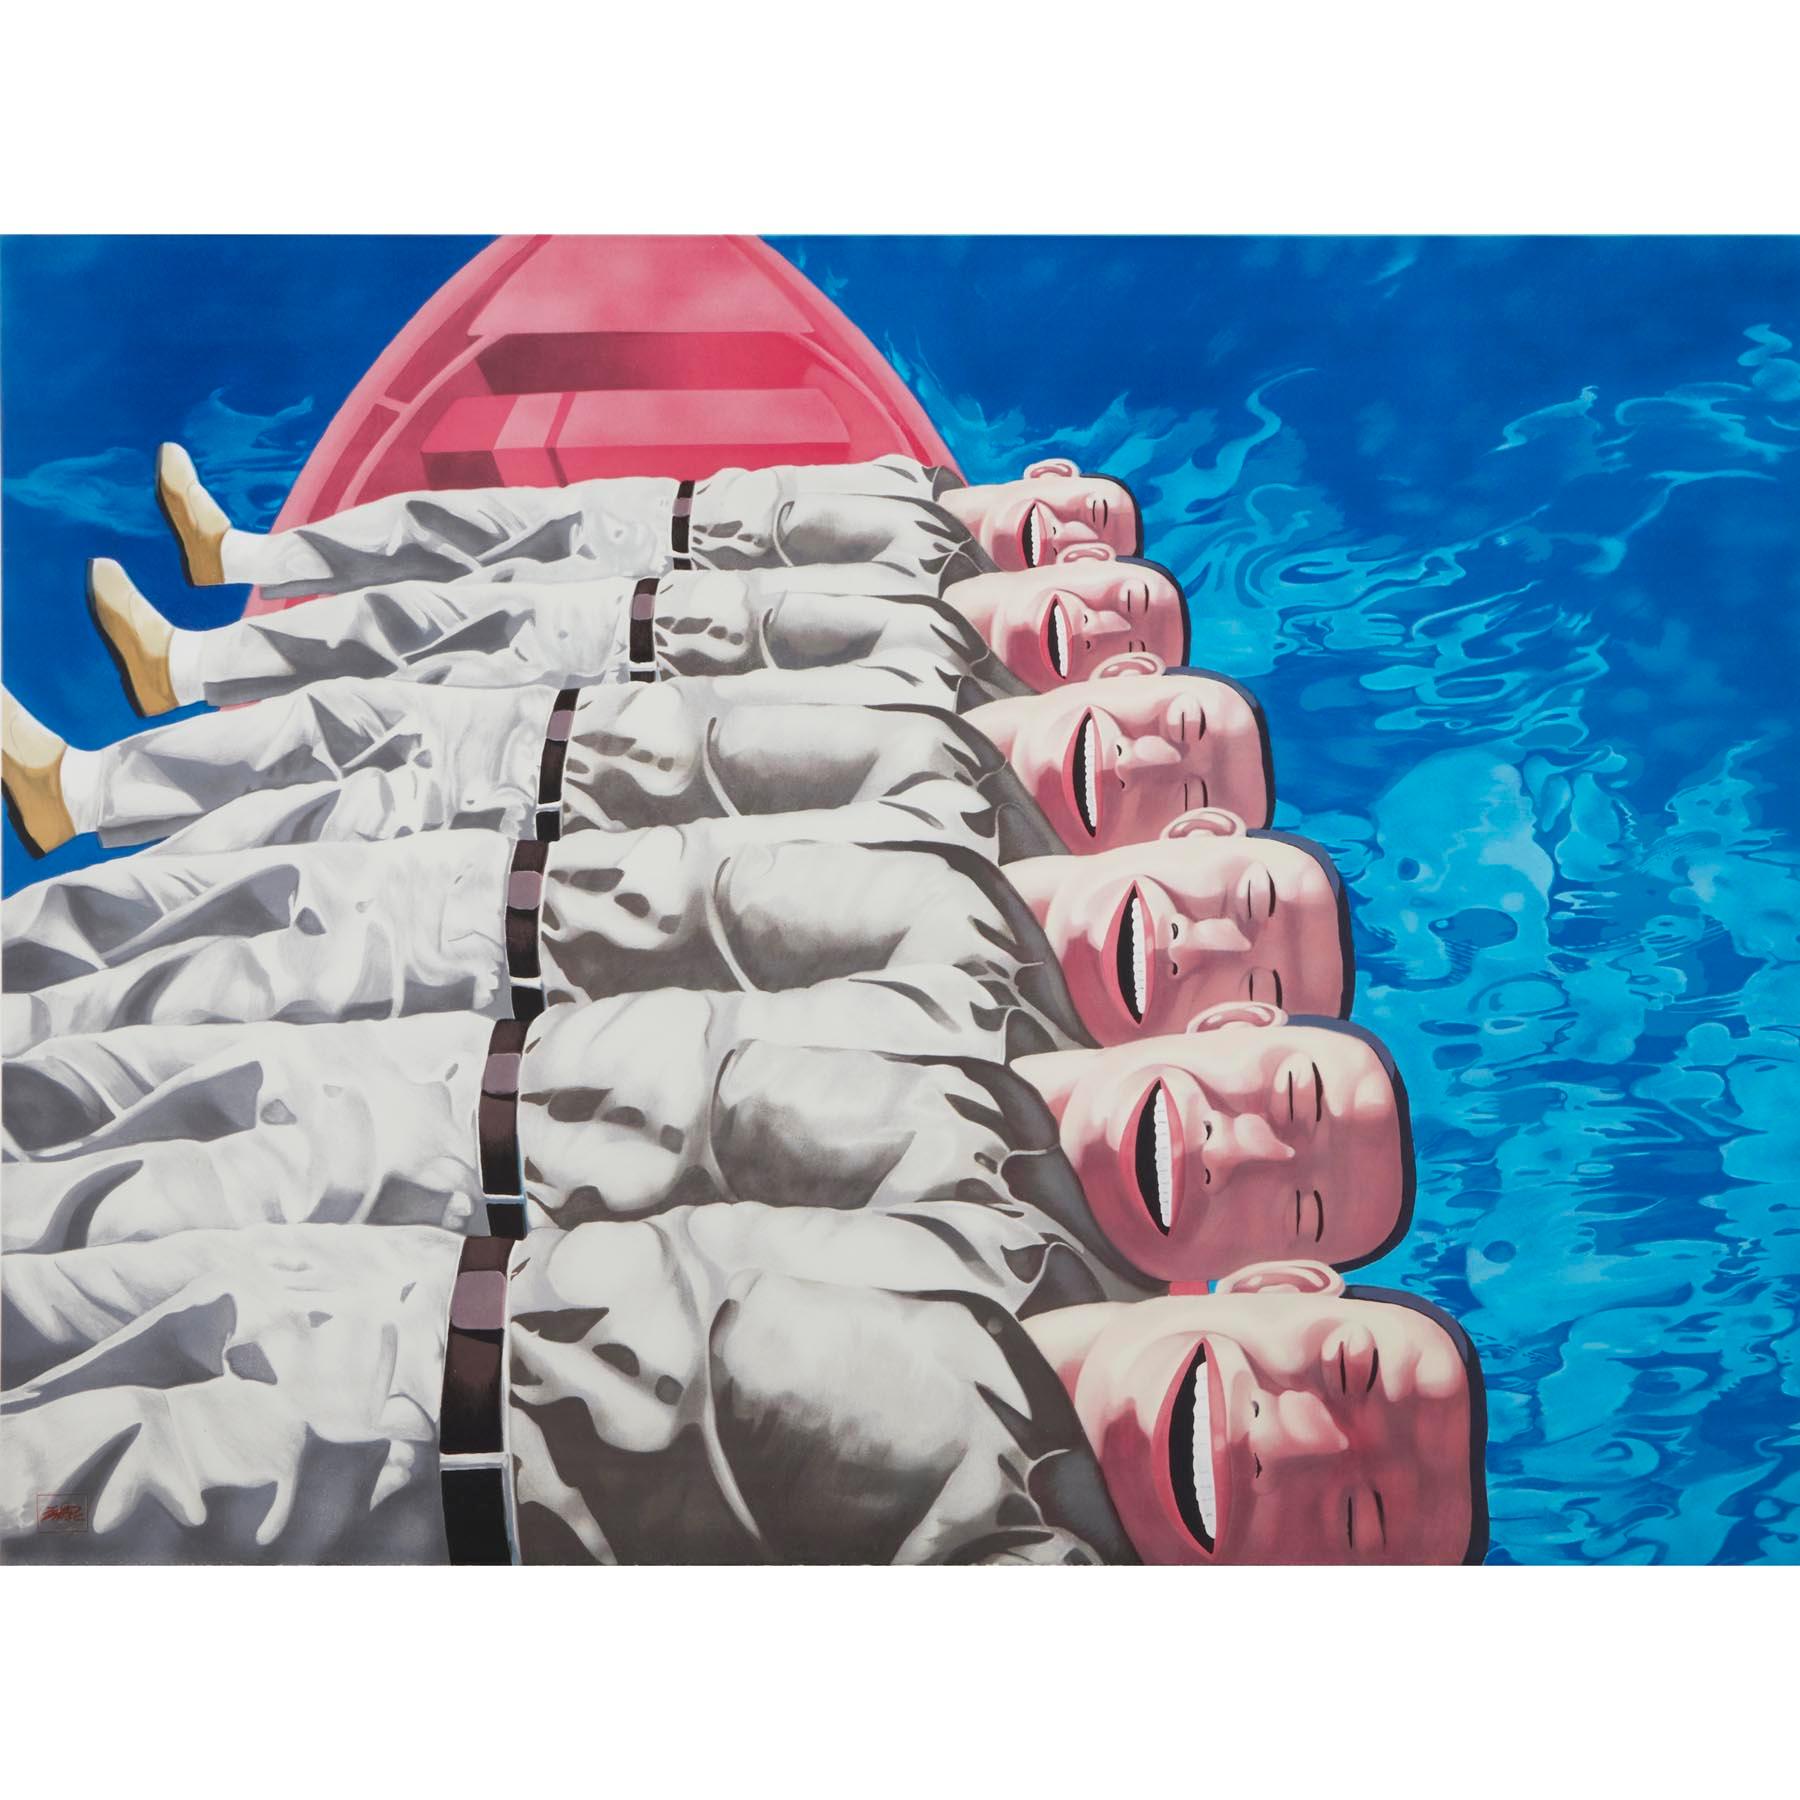 Yue Minjun, Red Boat
Contemporary, 21st Century, Lithograph, Limited Edition, Chinese
Lithograph
Edition of 130
80 × 120 cm (47 1/5 × 31 1/2 in)
Stamped Signature, numbered in Roman numerals
In mint condition, as acquired from the publisher

PLEASE